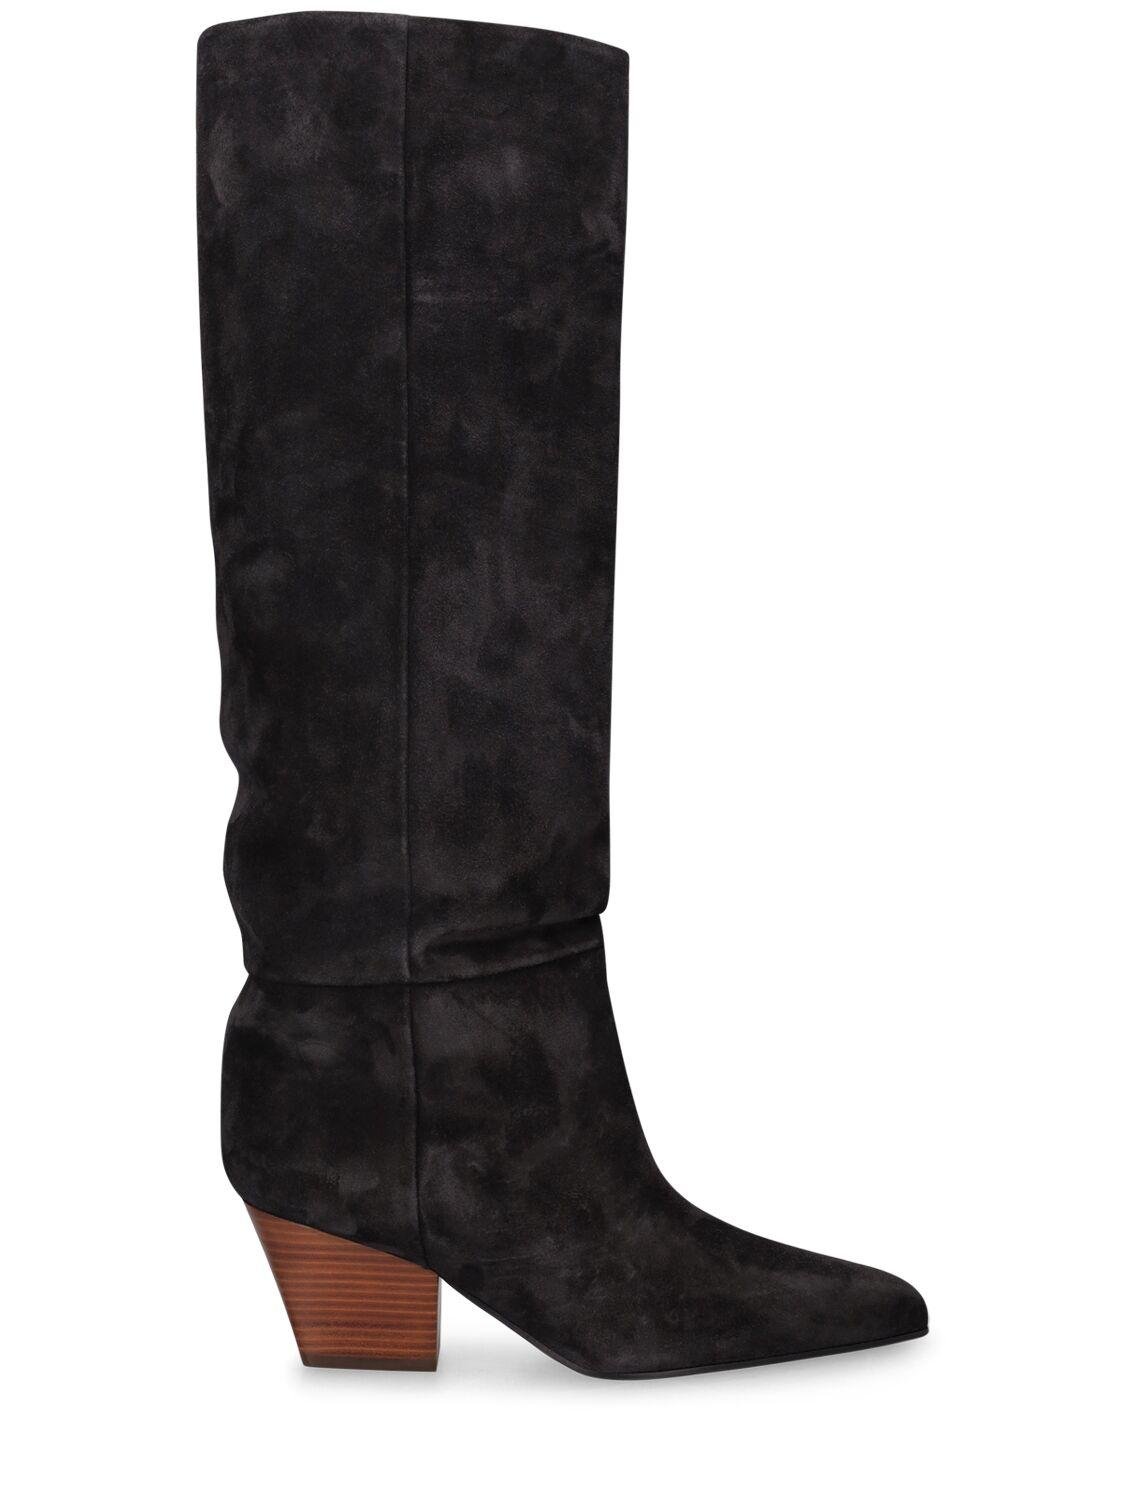 60mm Jane Suede Tall Boots by PARIS TEXAS